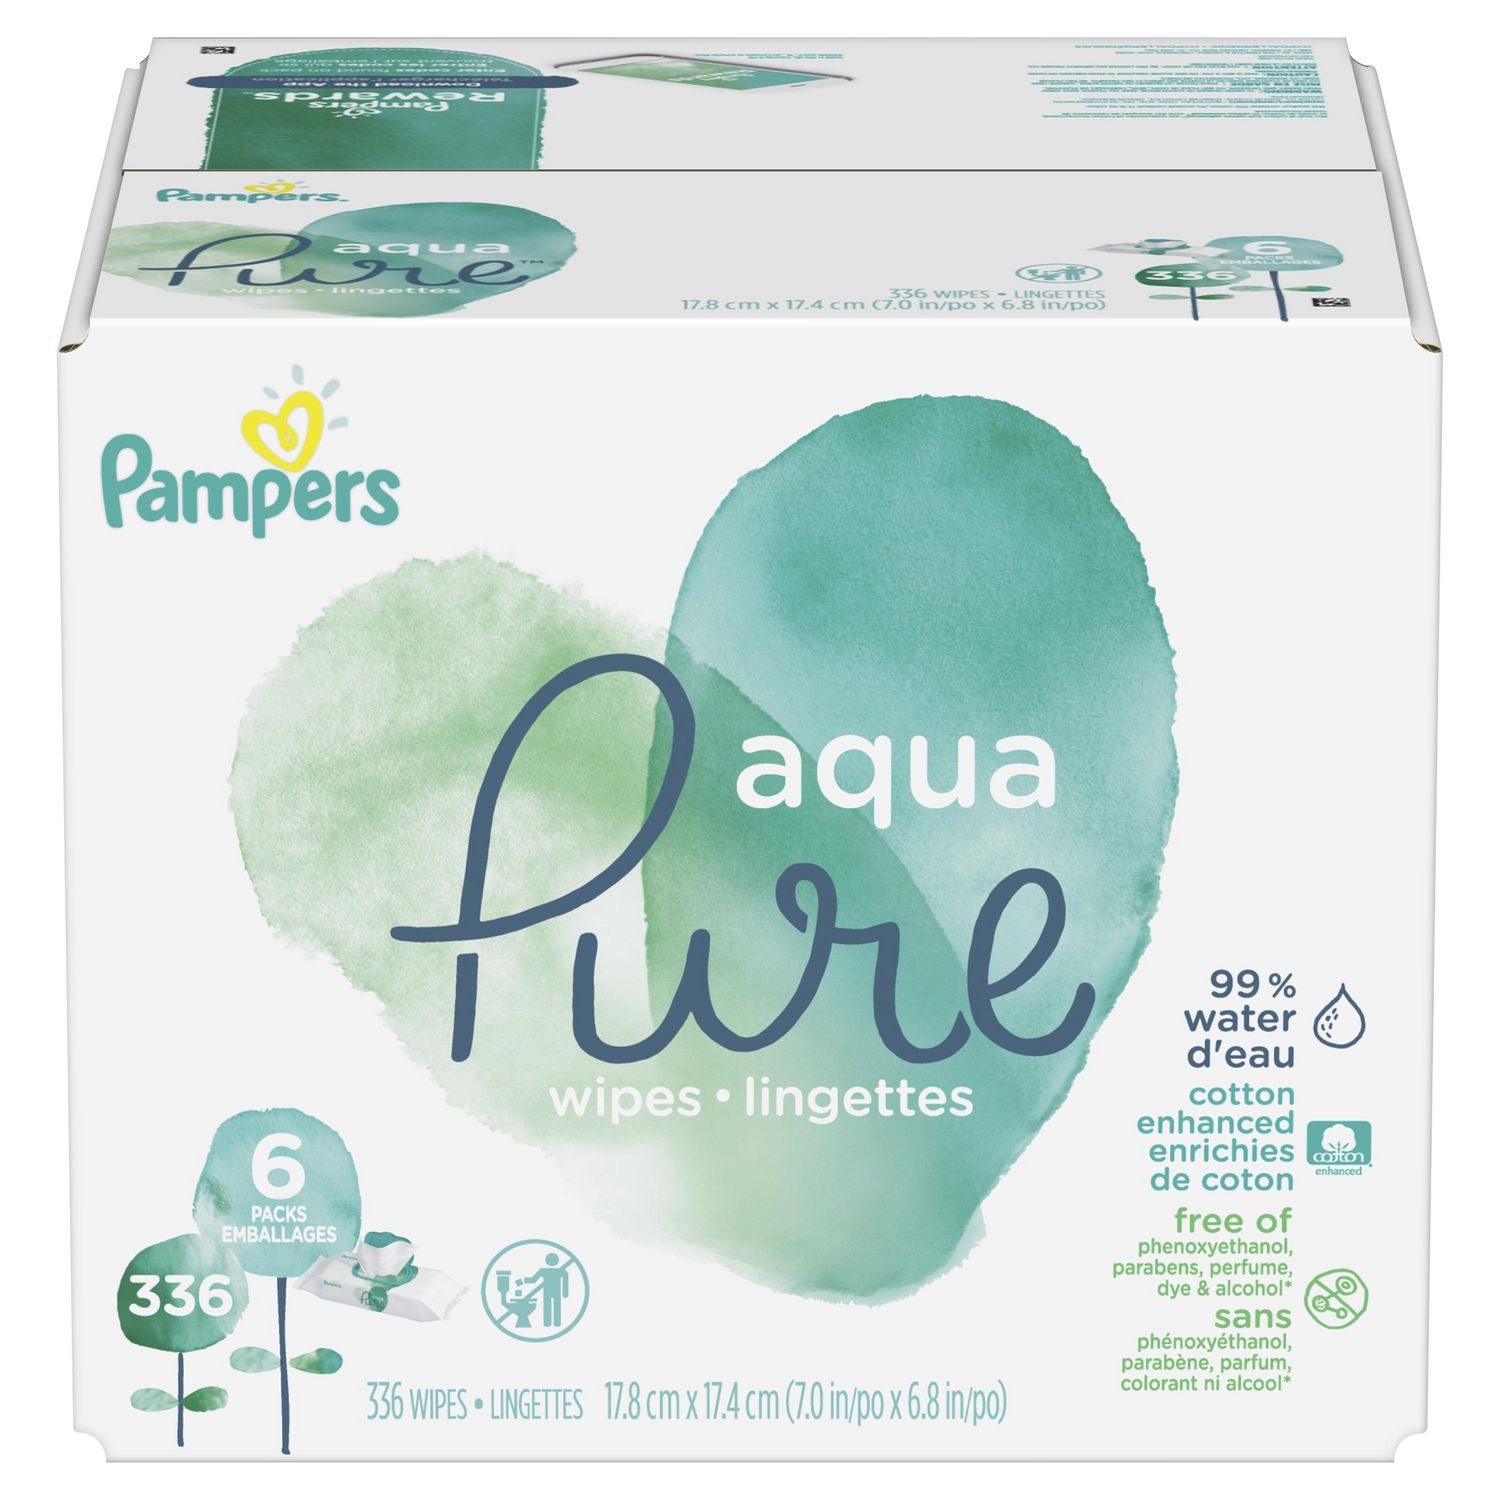 Pampers Aqua Pure Sensitive Baby Wipes - 6 packs (336 wipes total)